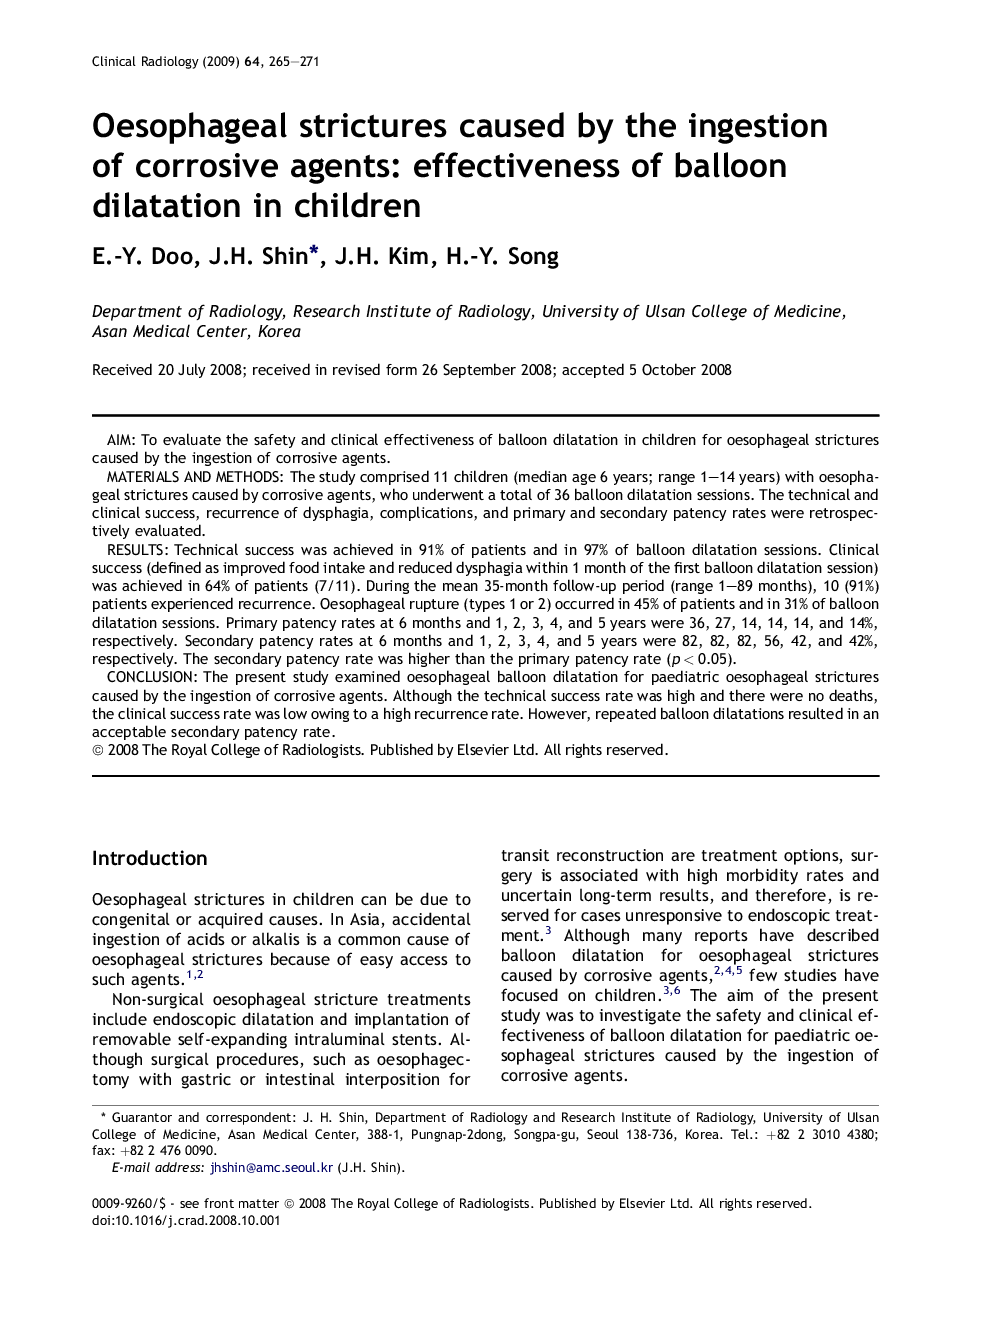 Oesophageal strictures caused by the ingestion of corrosive agents: effectiveness of balloon dilatation in children